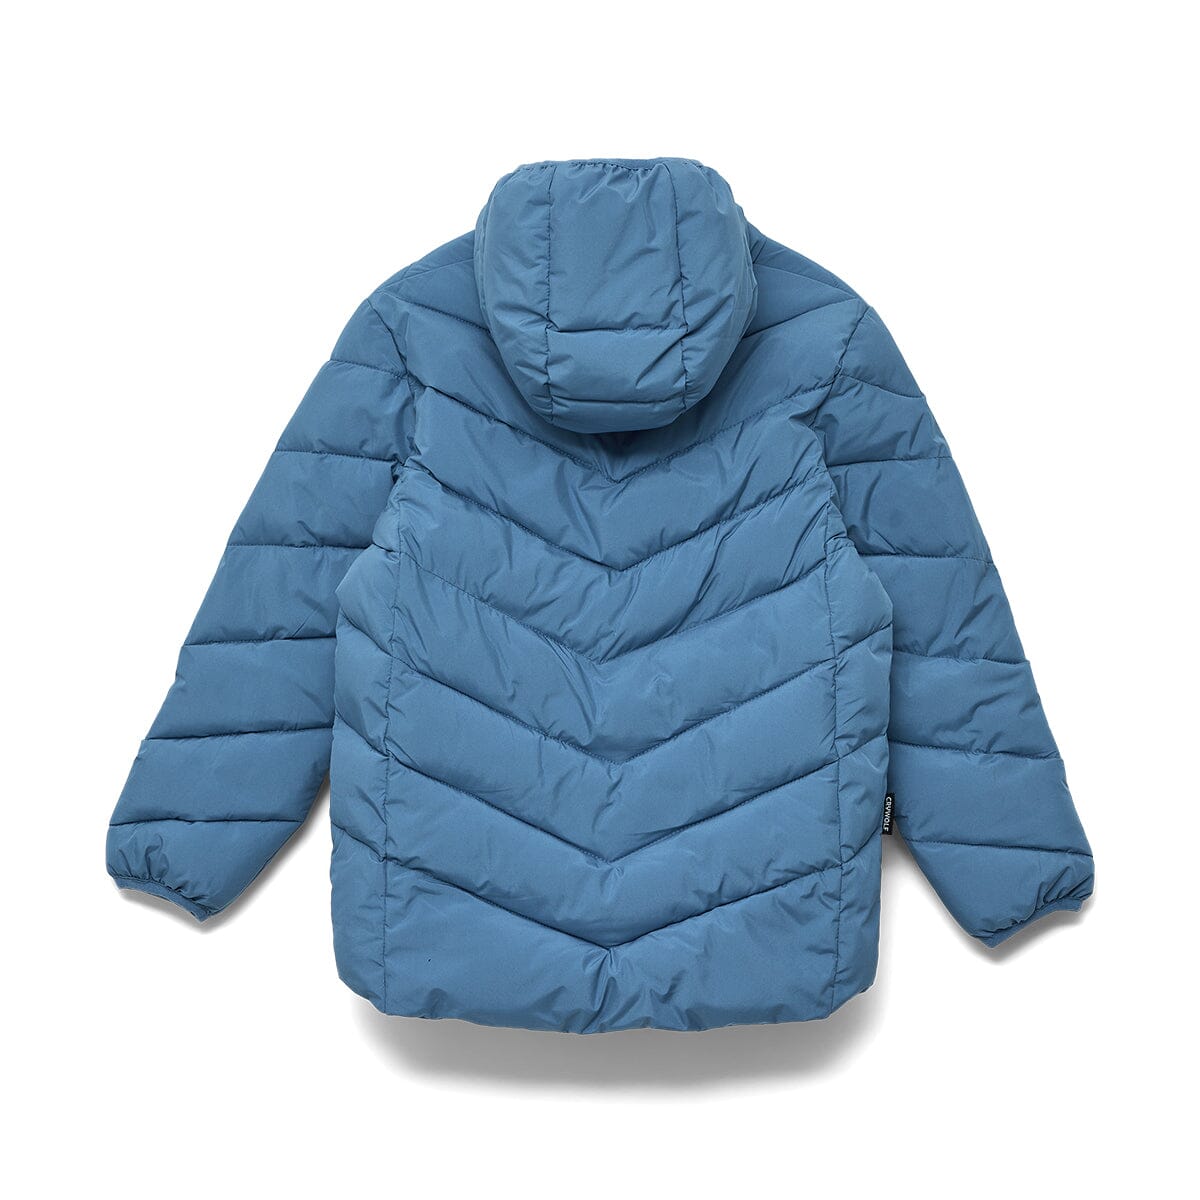 Crywolf | ECO PUFFER - Southern Blue *** PRE ORDER / DUE EARLY-MID APRIL *** Boys Crywolf